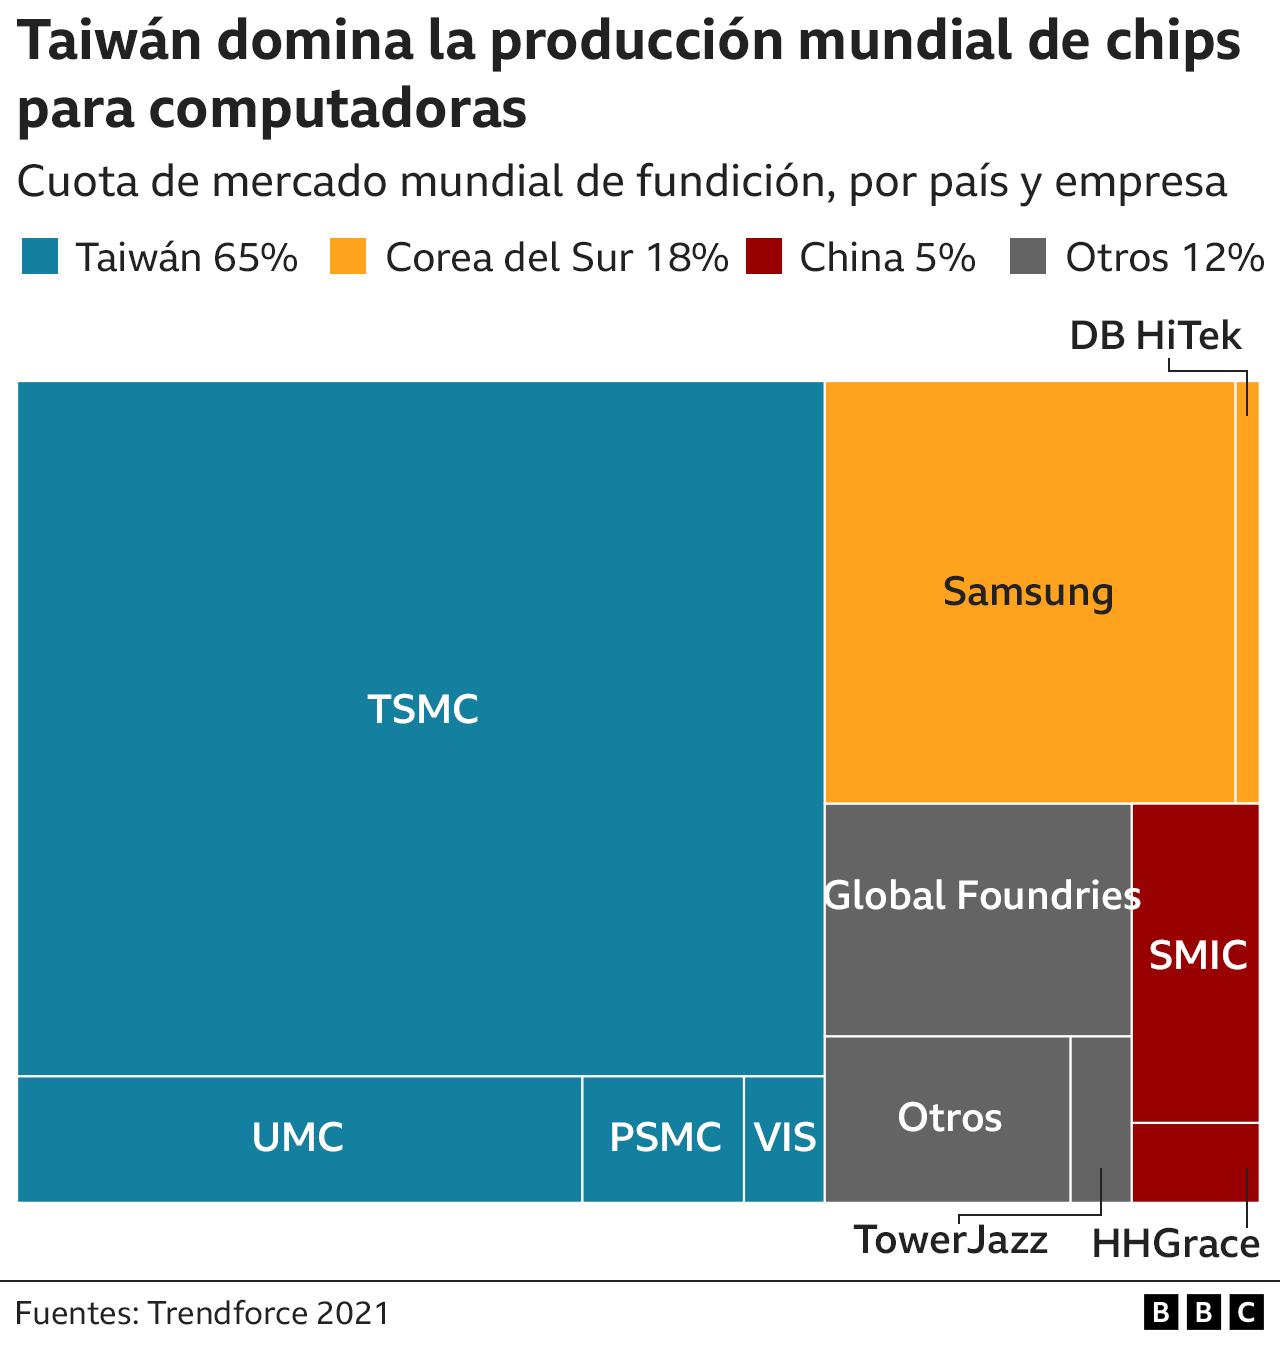 Taiwan's weight in the global microchip and semiconductor industry.